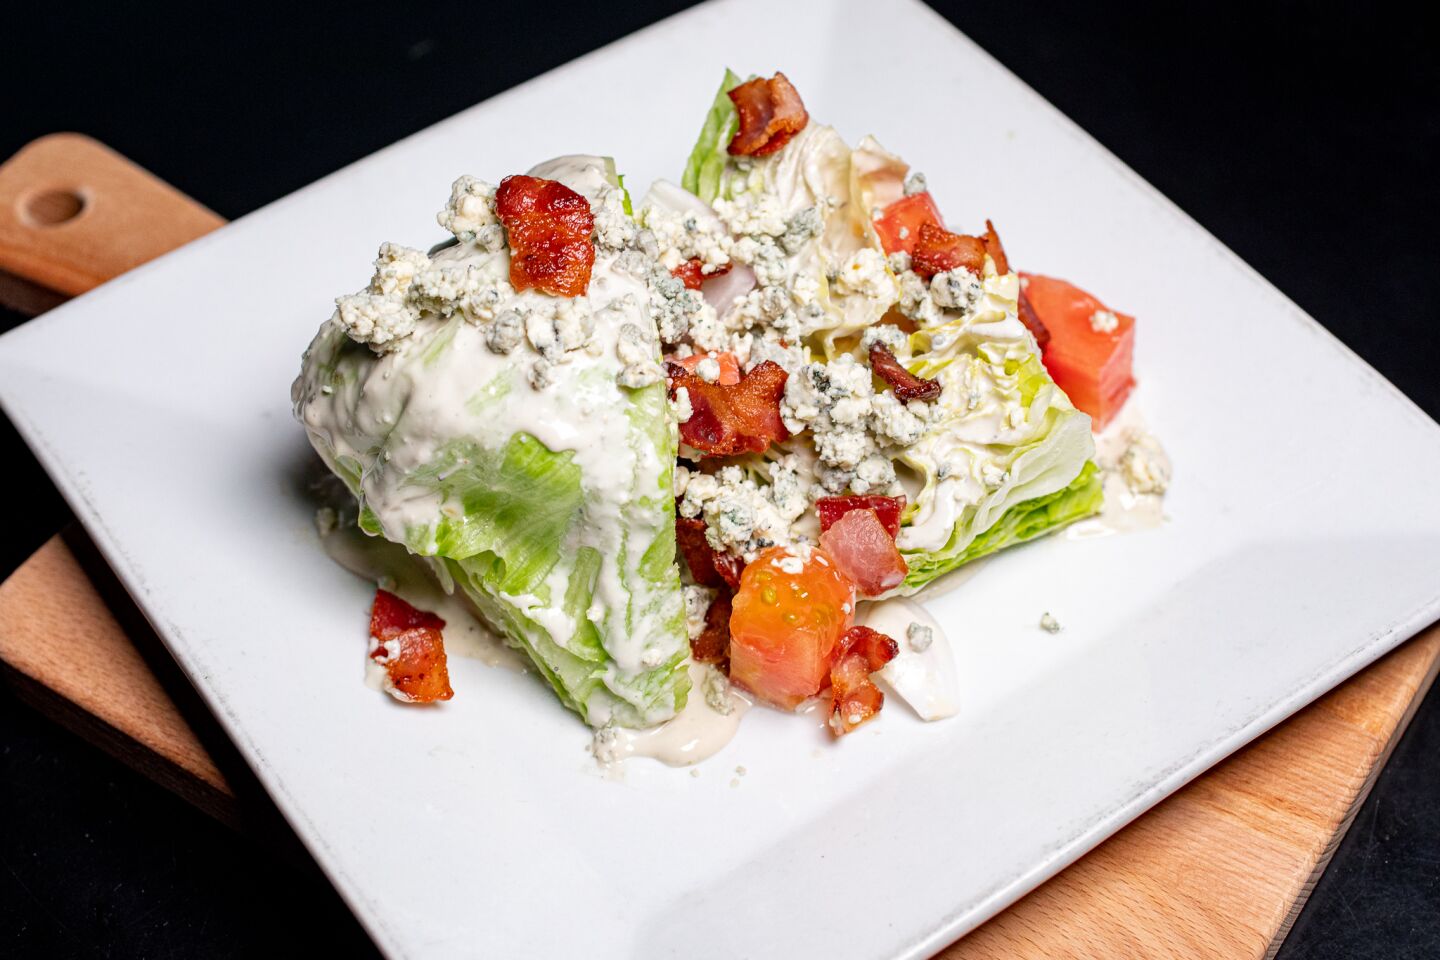 The wedge salad from the Riviera Supper Club and Turquoise Room.